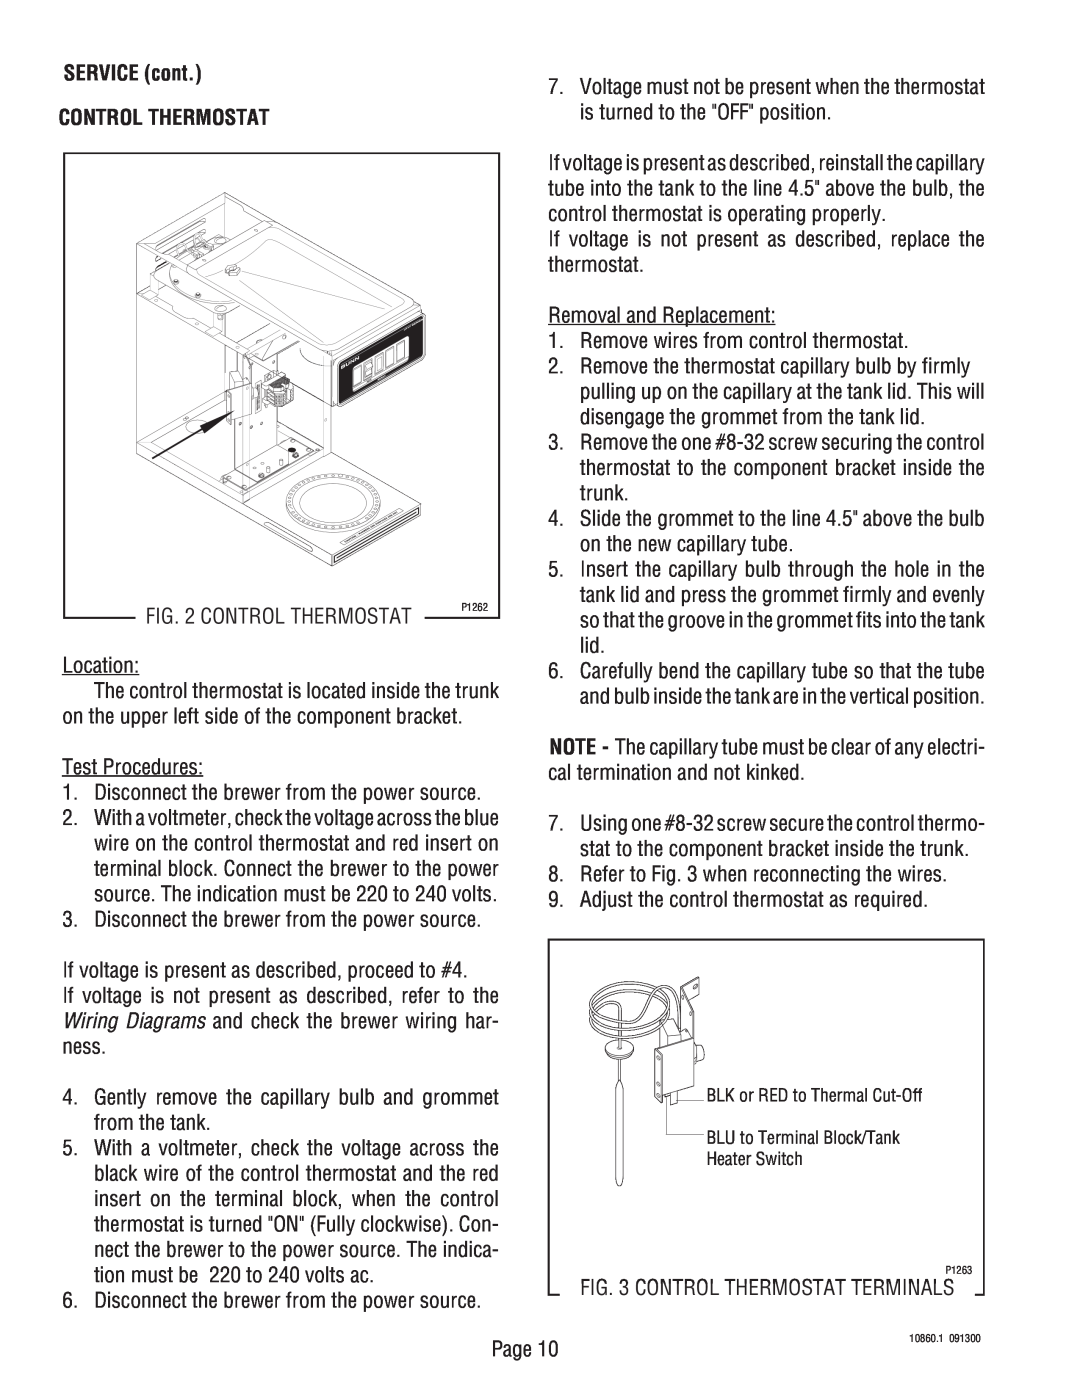 Bunn VP17A service manual SERVICE cont, Control Thermostat, is turned to the OFF position 